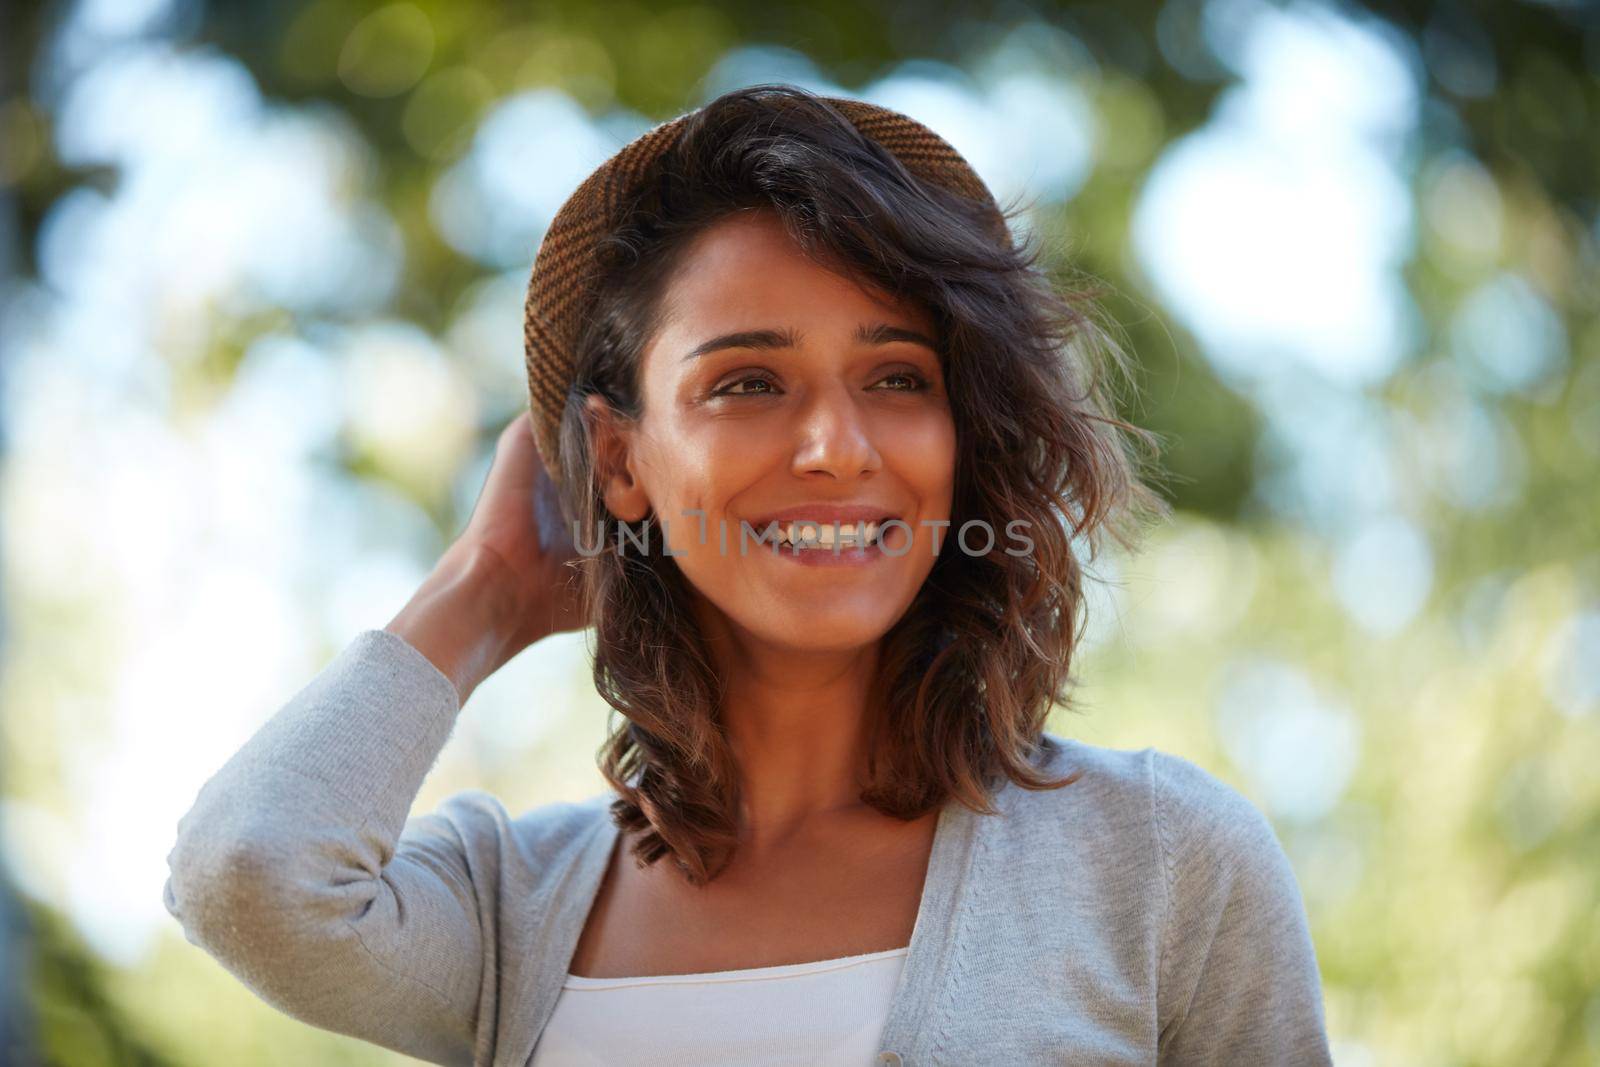 The outdoors are my favorite. Portrait of a beautiful young woman spending the day outdoors on a sunny day